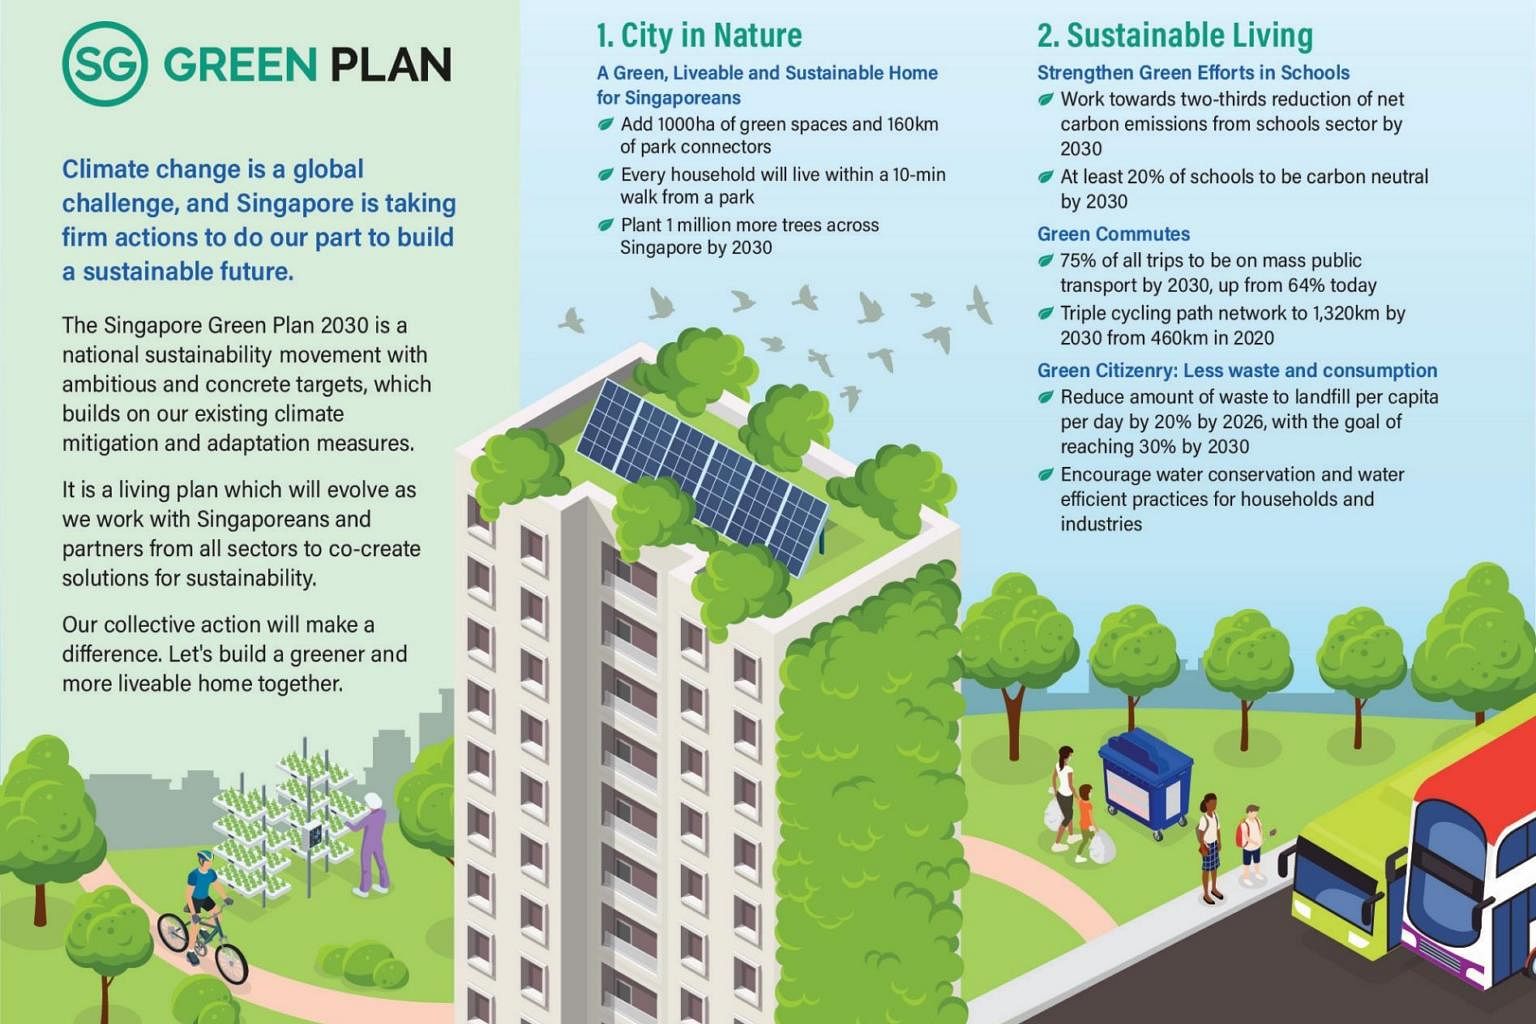 Singapore Green Plan 2030 to change the way people live, work, study